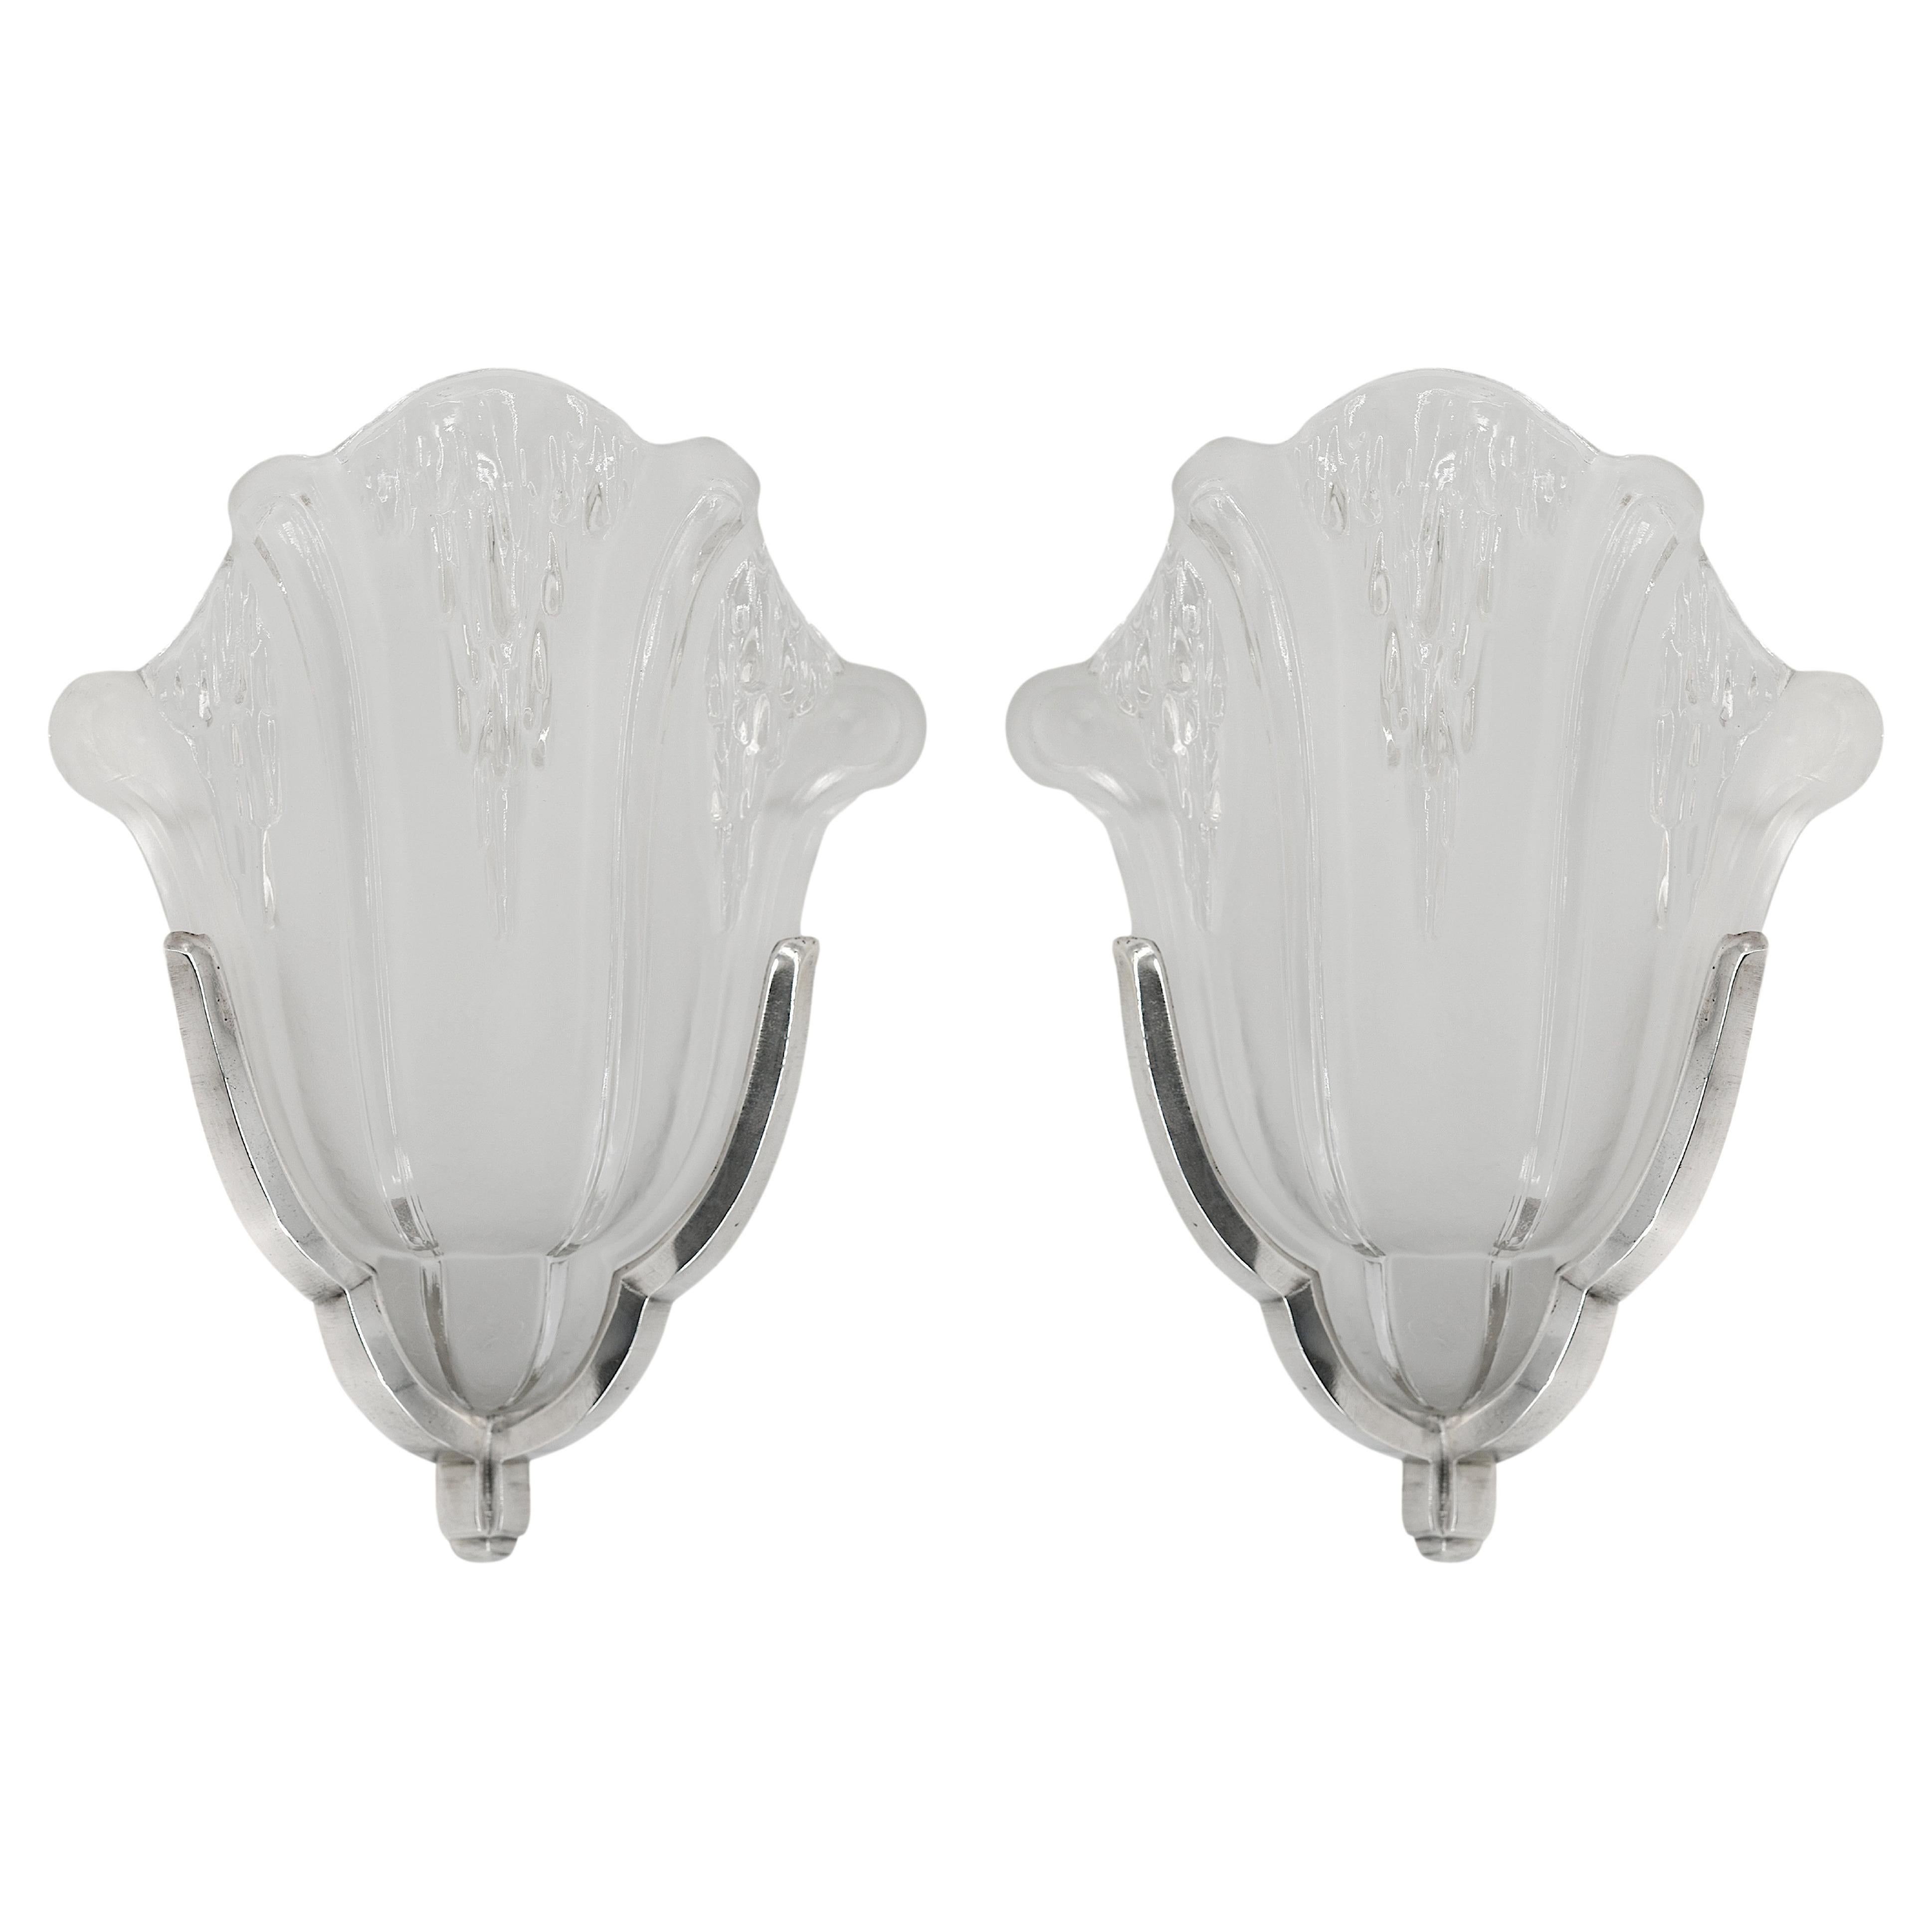 Jean Gauthier Art Deco French Pair of Corner Wall Sconces, 1930s